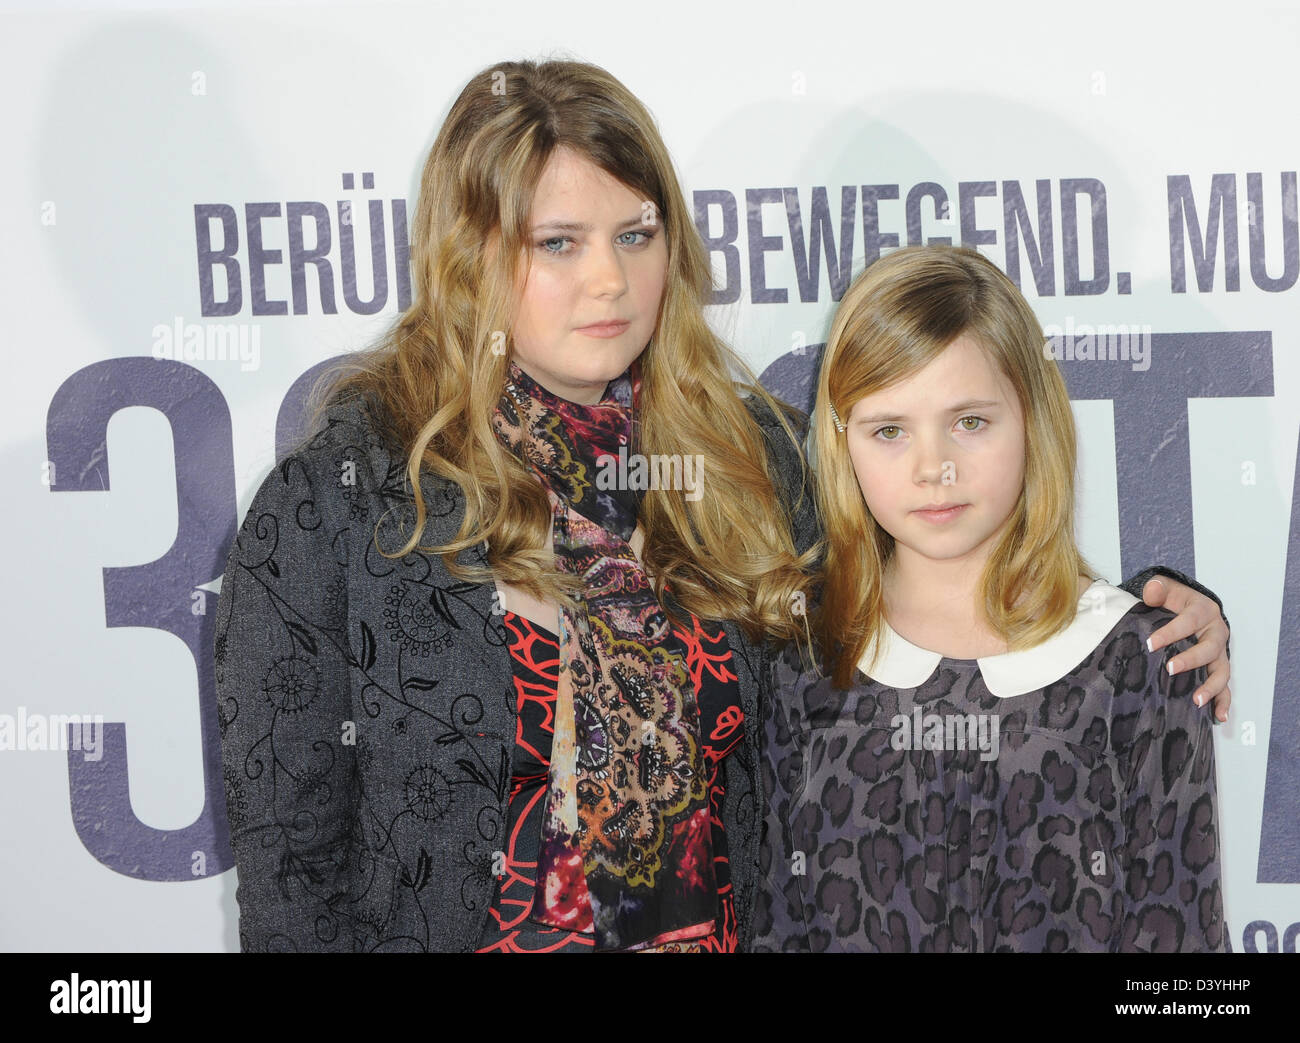 Munich, Germany. 26th February 2013. The former abduction victim Natascha Kampusch  and actress Amelia Pidgeon, who plays the part of Kampush as a littel girl, attend the premier of the film '3096 Tage' (3096 Days) in Munich, Germany, 26 February 2013. The film retells the story of Kampusch and her abduction. The film will start in cinemas across Germany on 28 February 2013. Photo: Ursula Dueren/dpa/Alamy Live News Stock Photo